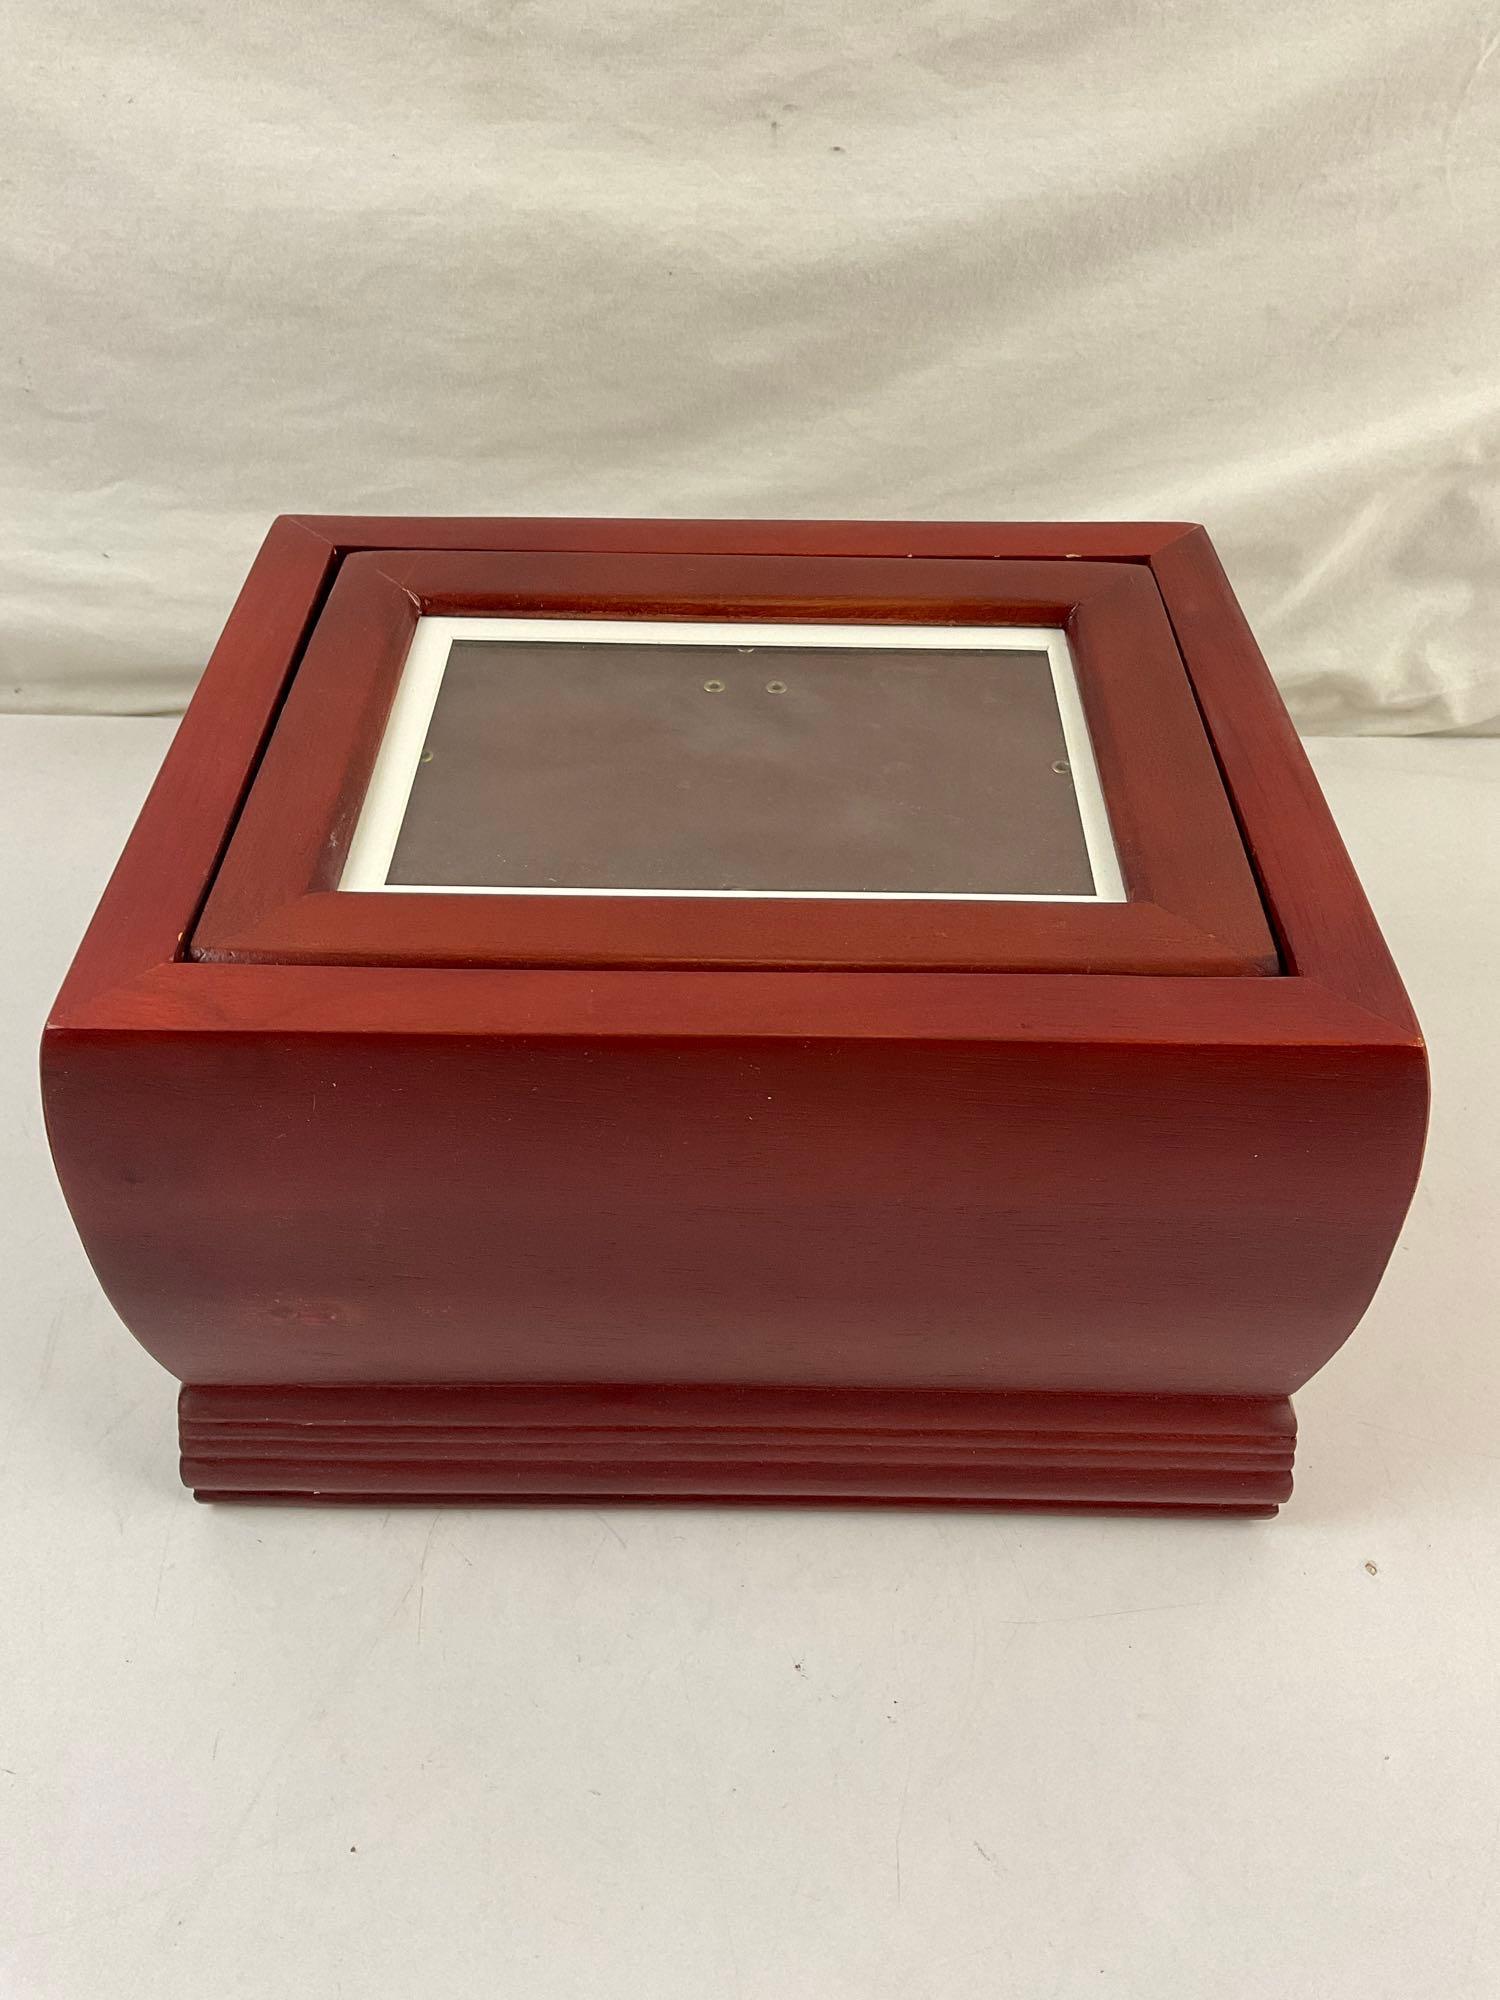 Modern Wooden Cremation Ashes Urn w/ Photo Frame. New in Box. Measures 10" x 6.5" See pics.